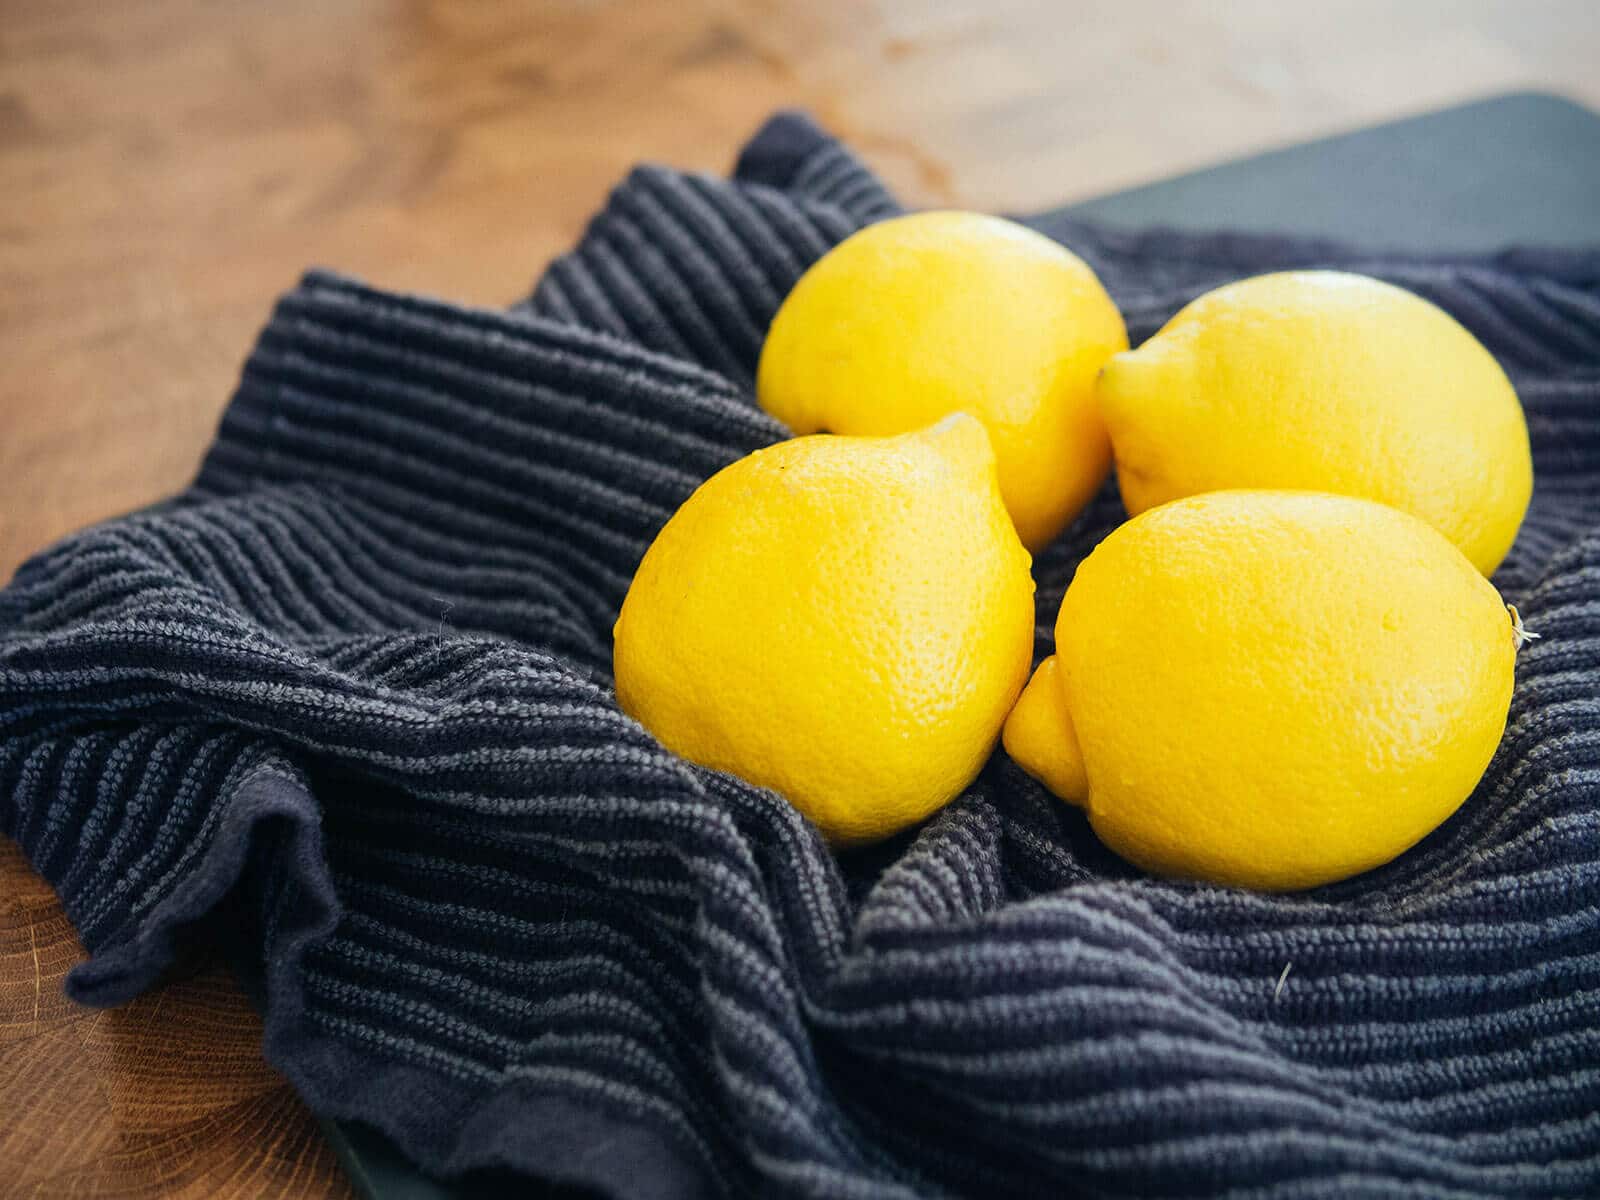 Four lemons washed and drying on a kitchen towel